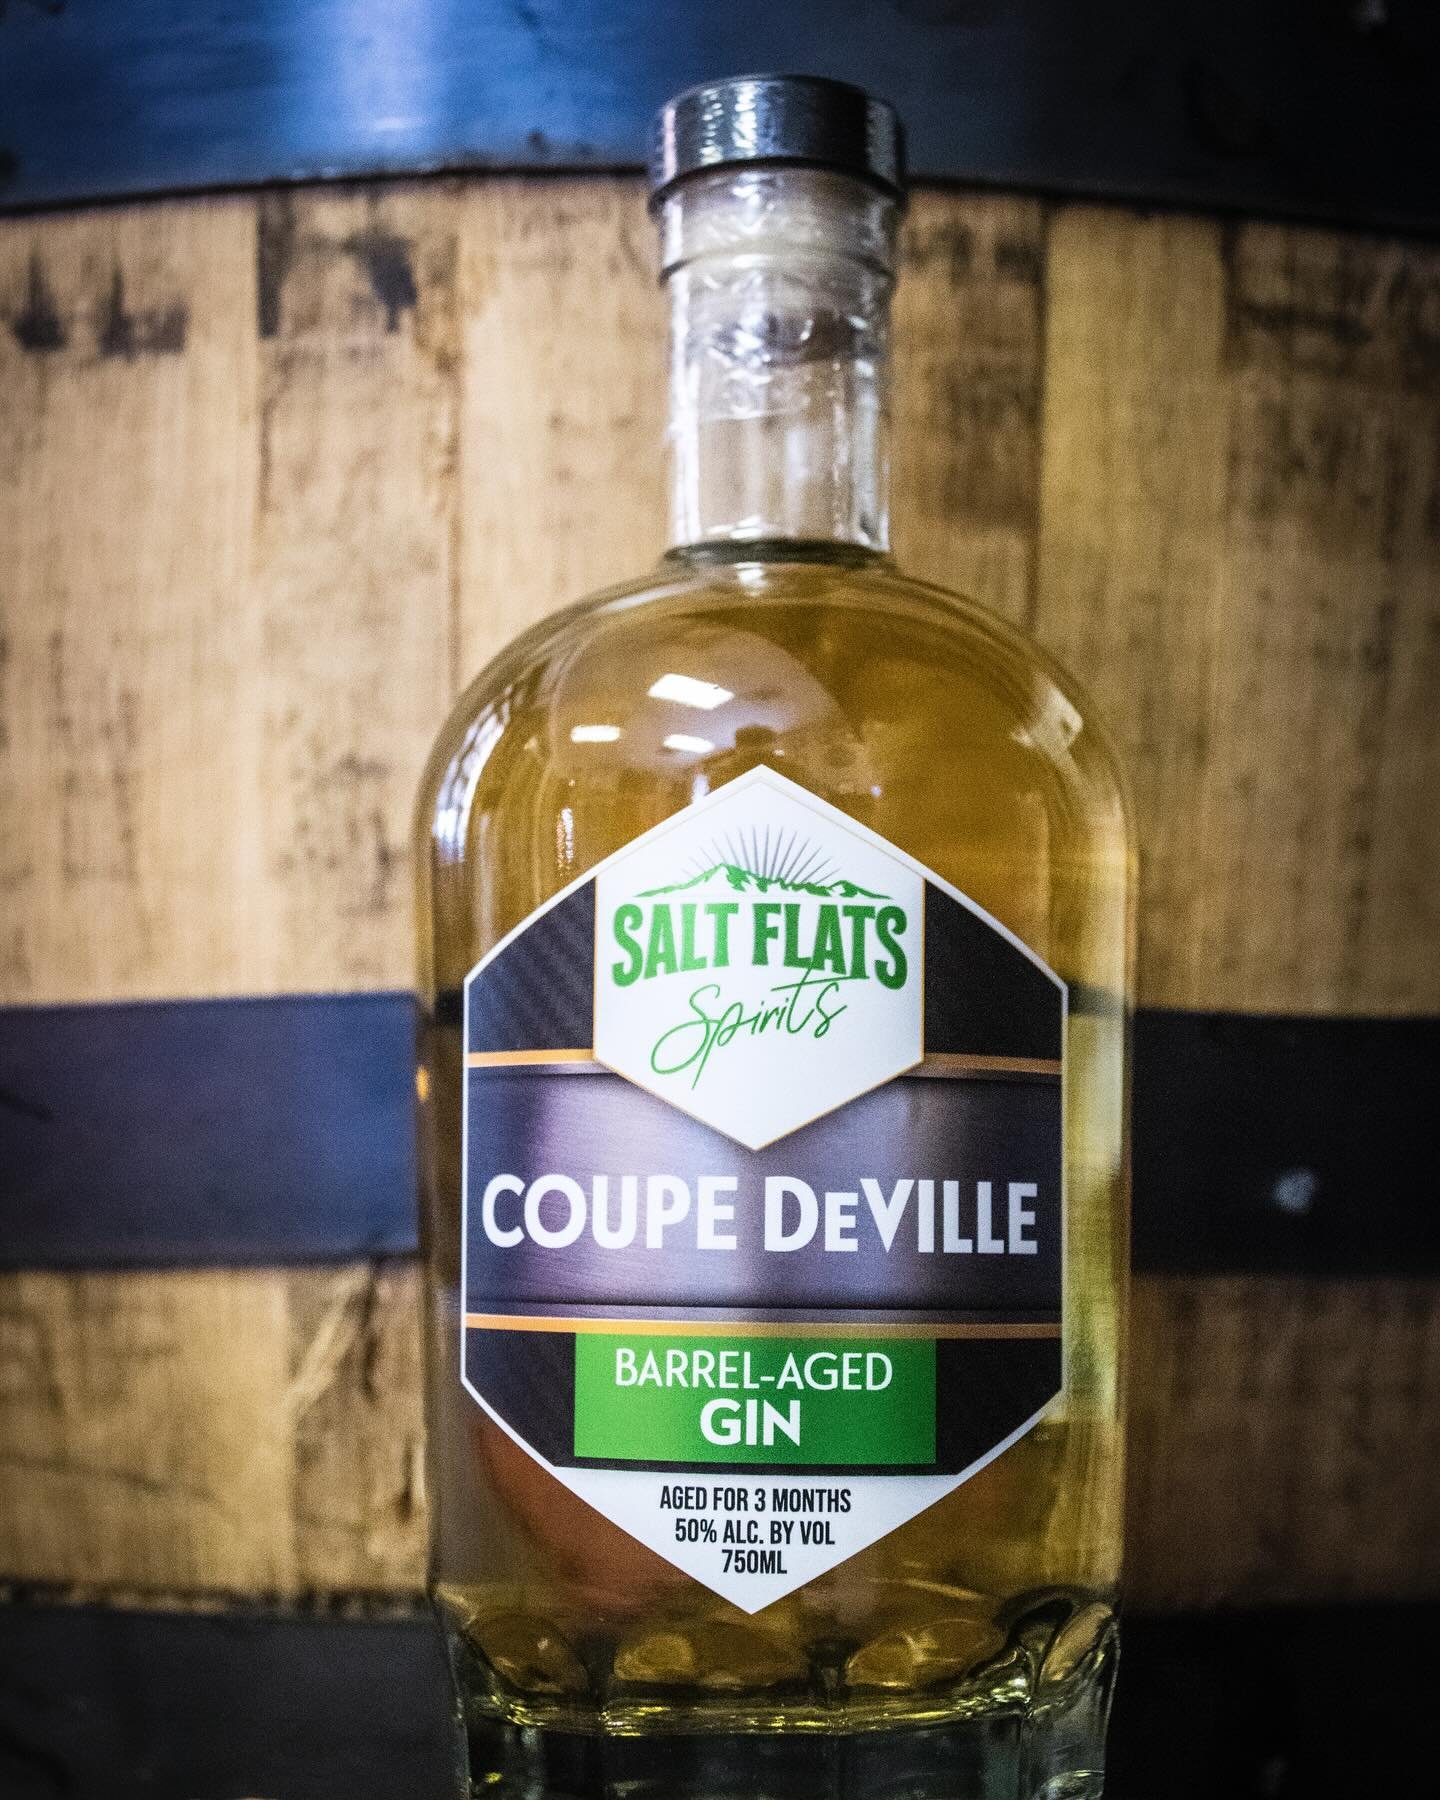 Did you know that our Coupe DeVille Gin is stored in bourbon barrels for three months? Resulting in a delightful infusion of bourbon-like notes of oak and vanilla along with delicate botanical flavors and citrus.

Our Coupe Deville Gin is more than a